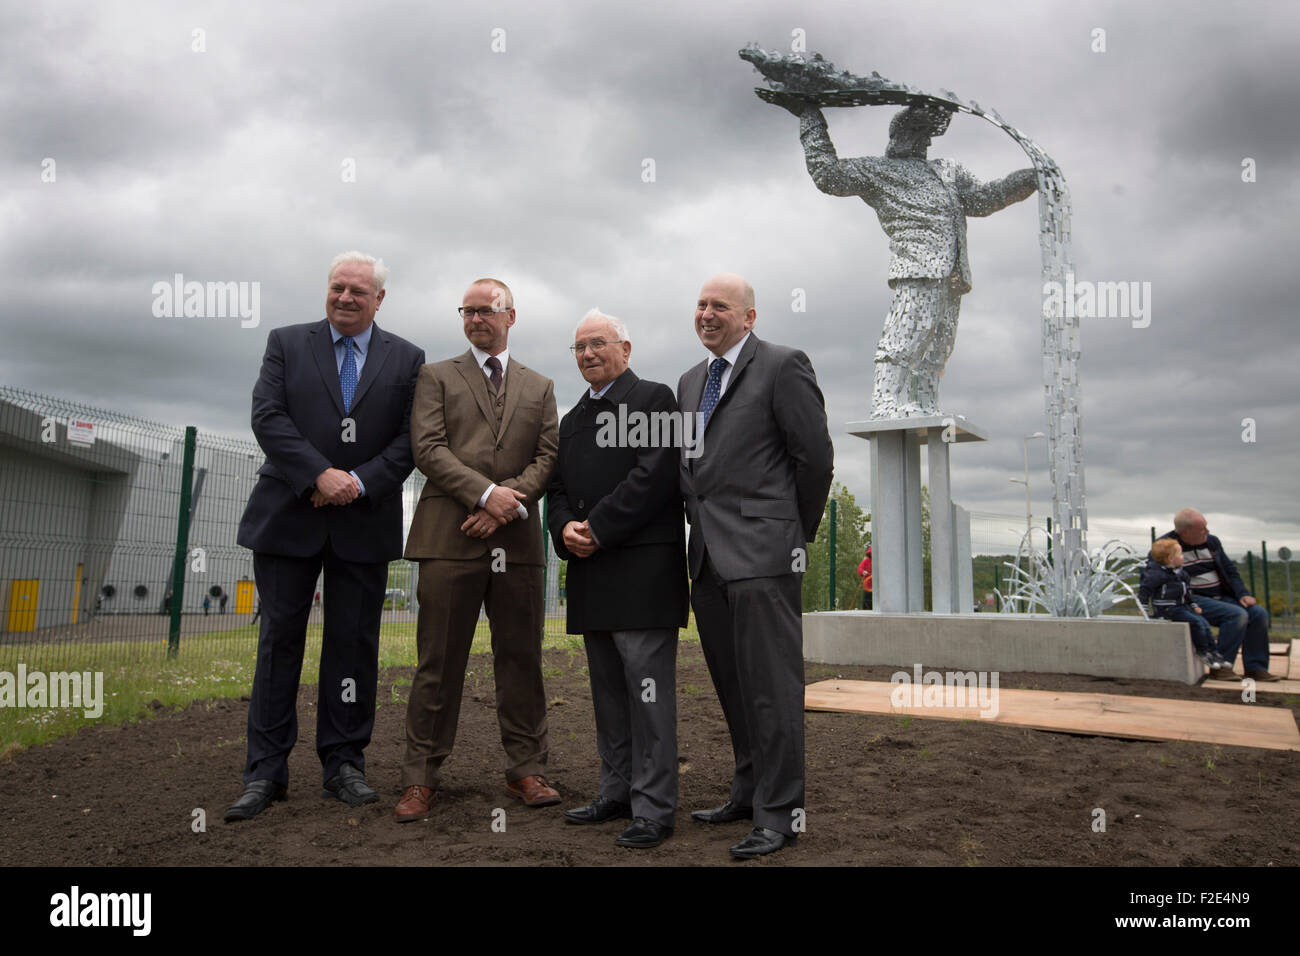 Artist Andy Scott (second left) with Terry Currie, Tommy Brennan and John Scott pictured at the official unveiling of Steel Man, his new sculpture made to commemorate those who lost their lives in the iron and steel industry in Scotland. The memorial was sited at Ravenscraig in Lanarkshire, on the site of Europe's largest former hot strip mill, which closed in 1992. The site was cleared in 1996 and now houses a sports centre, college and housing. Stock Photo